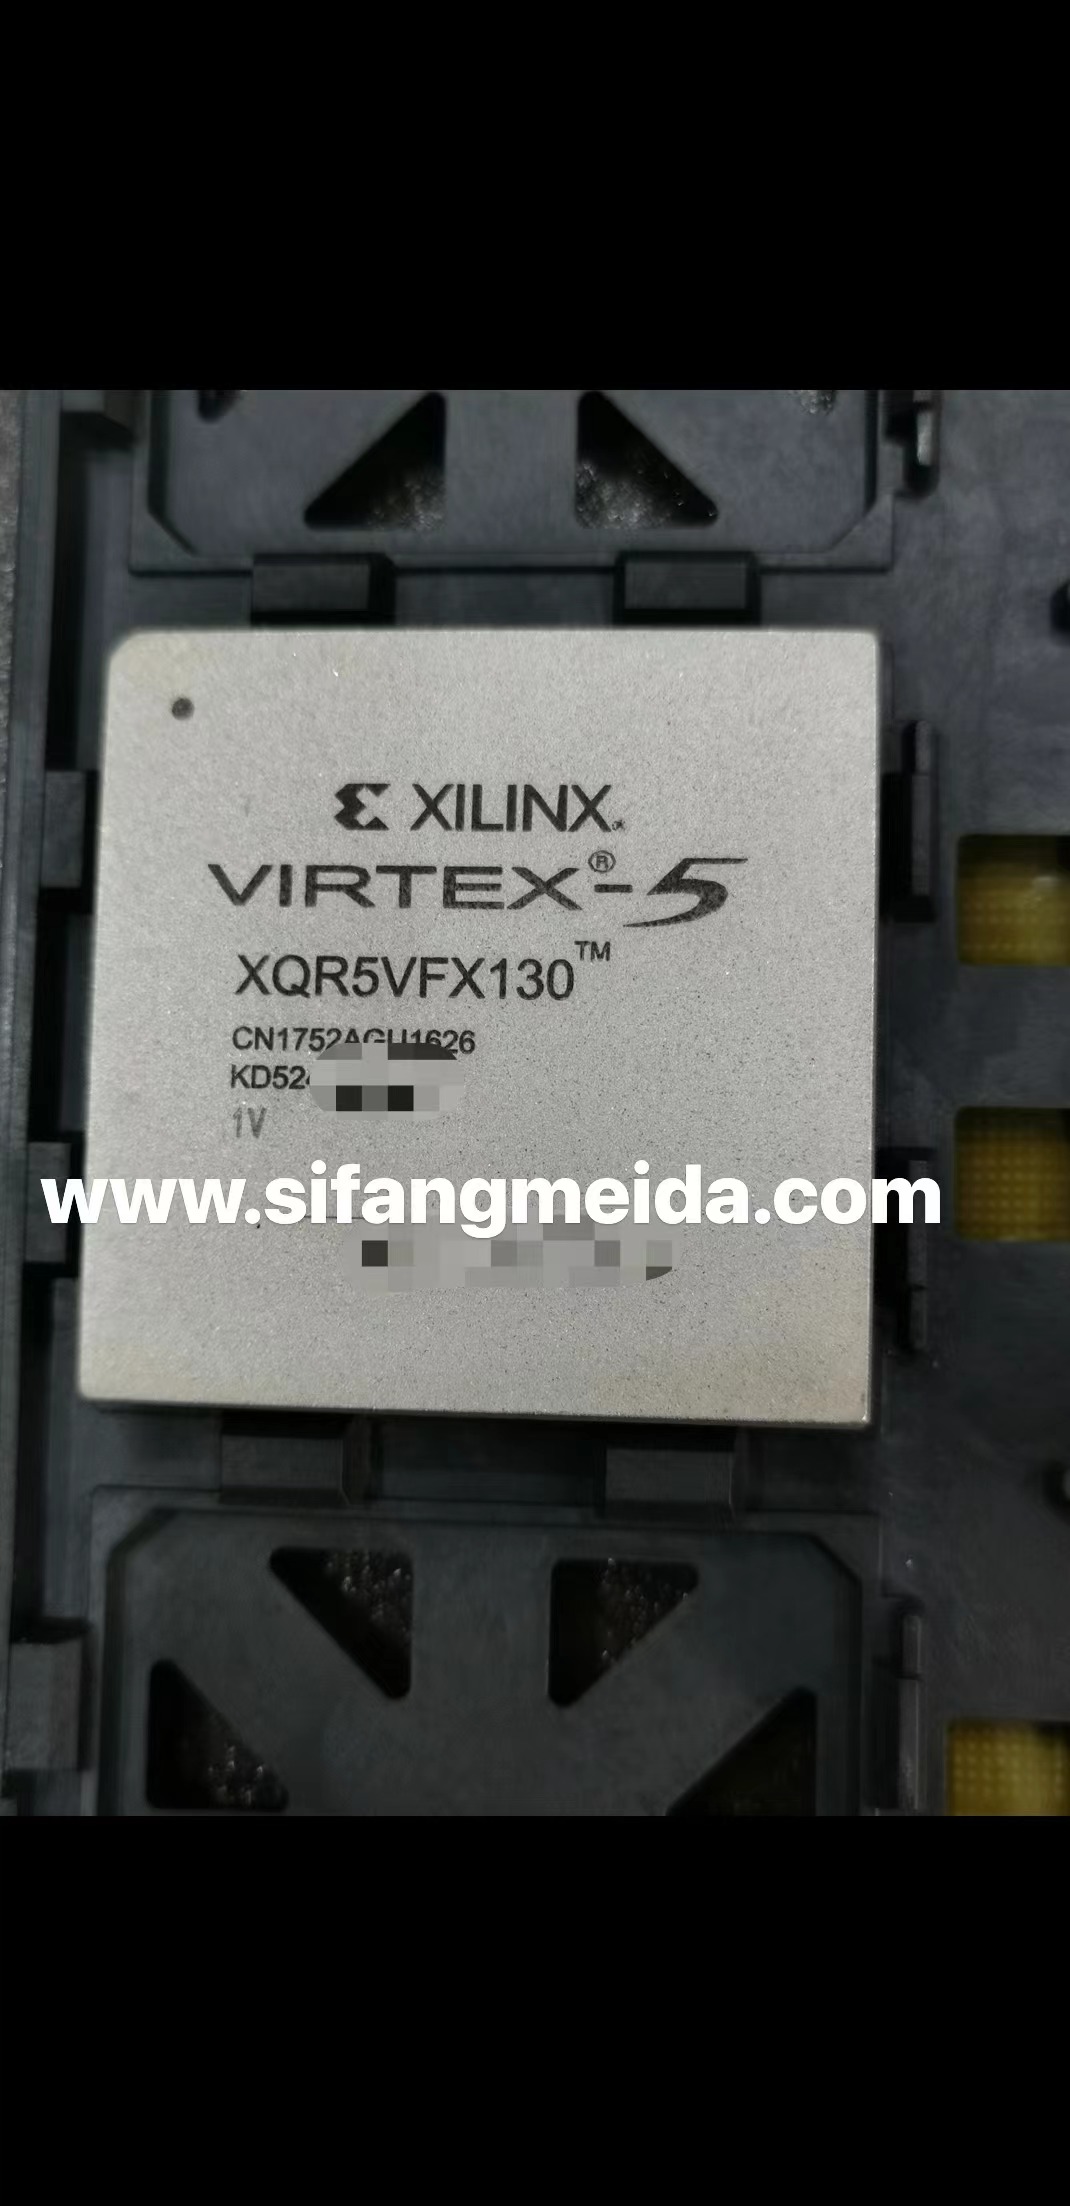 XILINX XQR5VFX130-1CN1752V Space-Class Reprogrammable FPGAs with Radiation Resistance (RH)